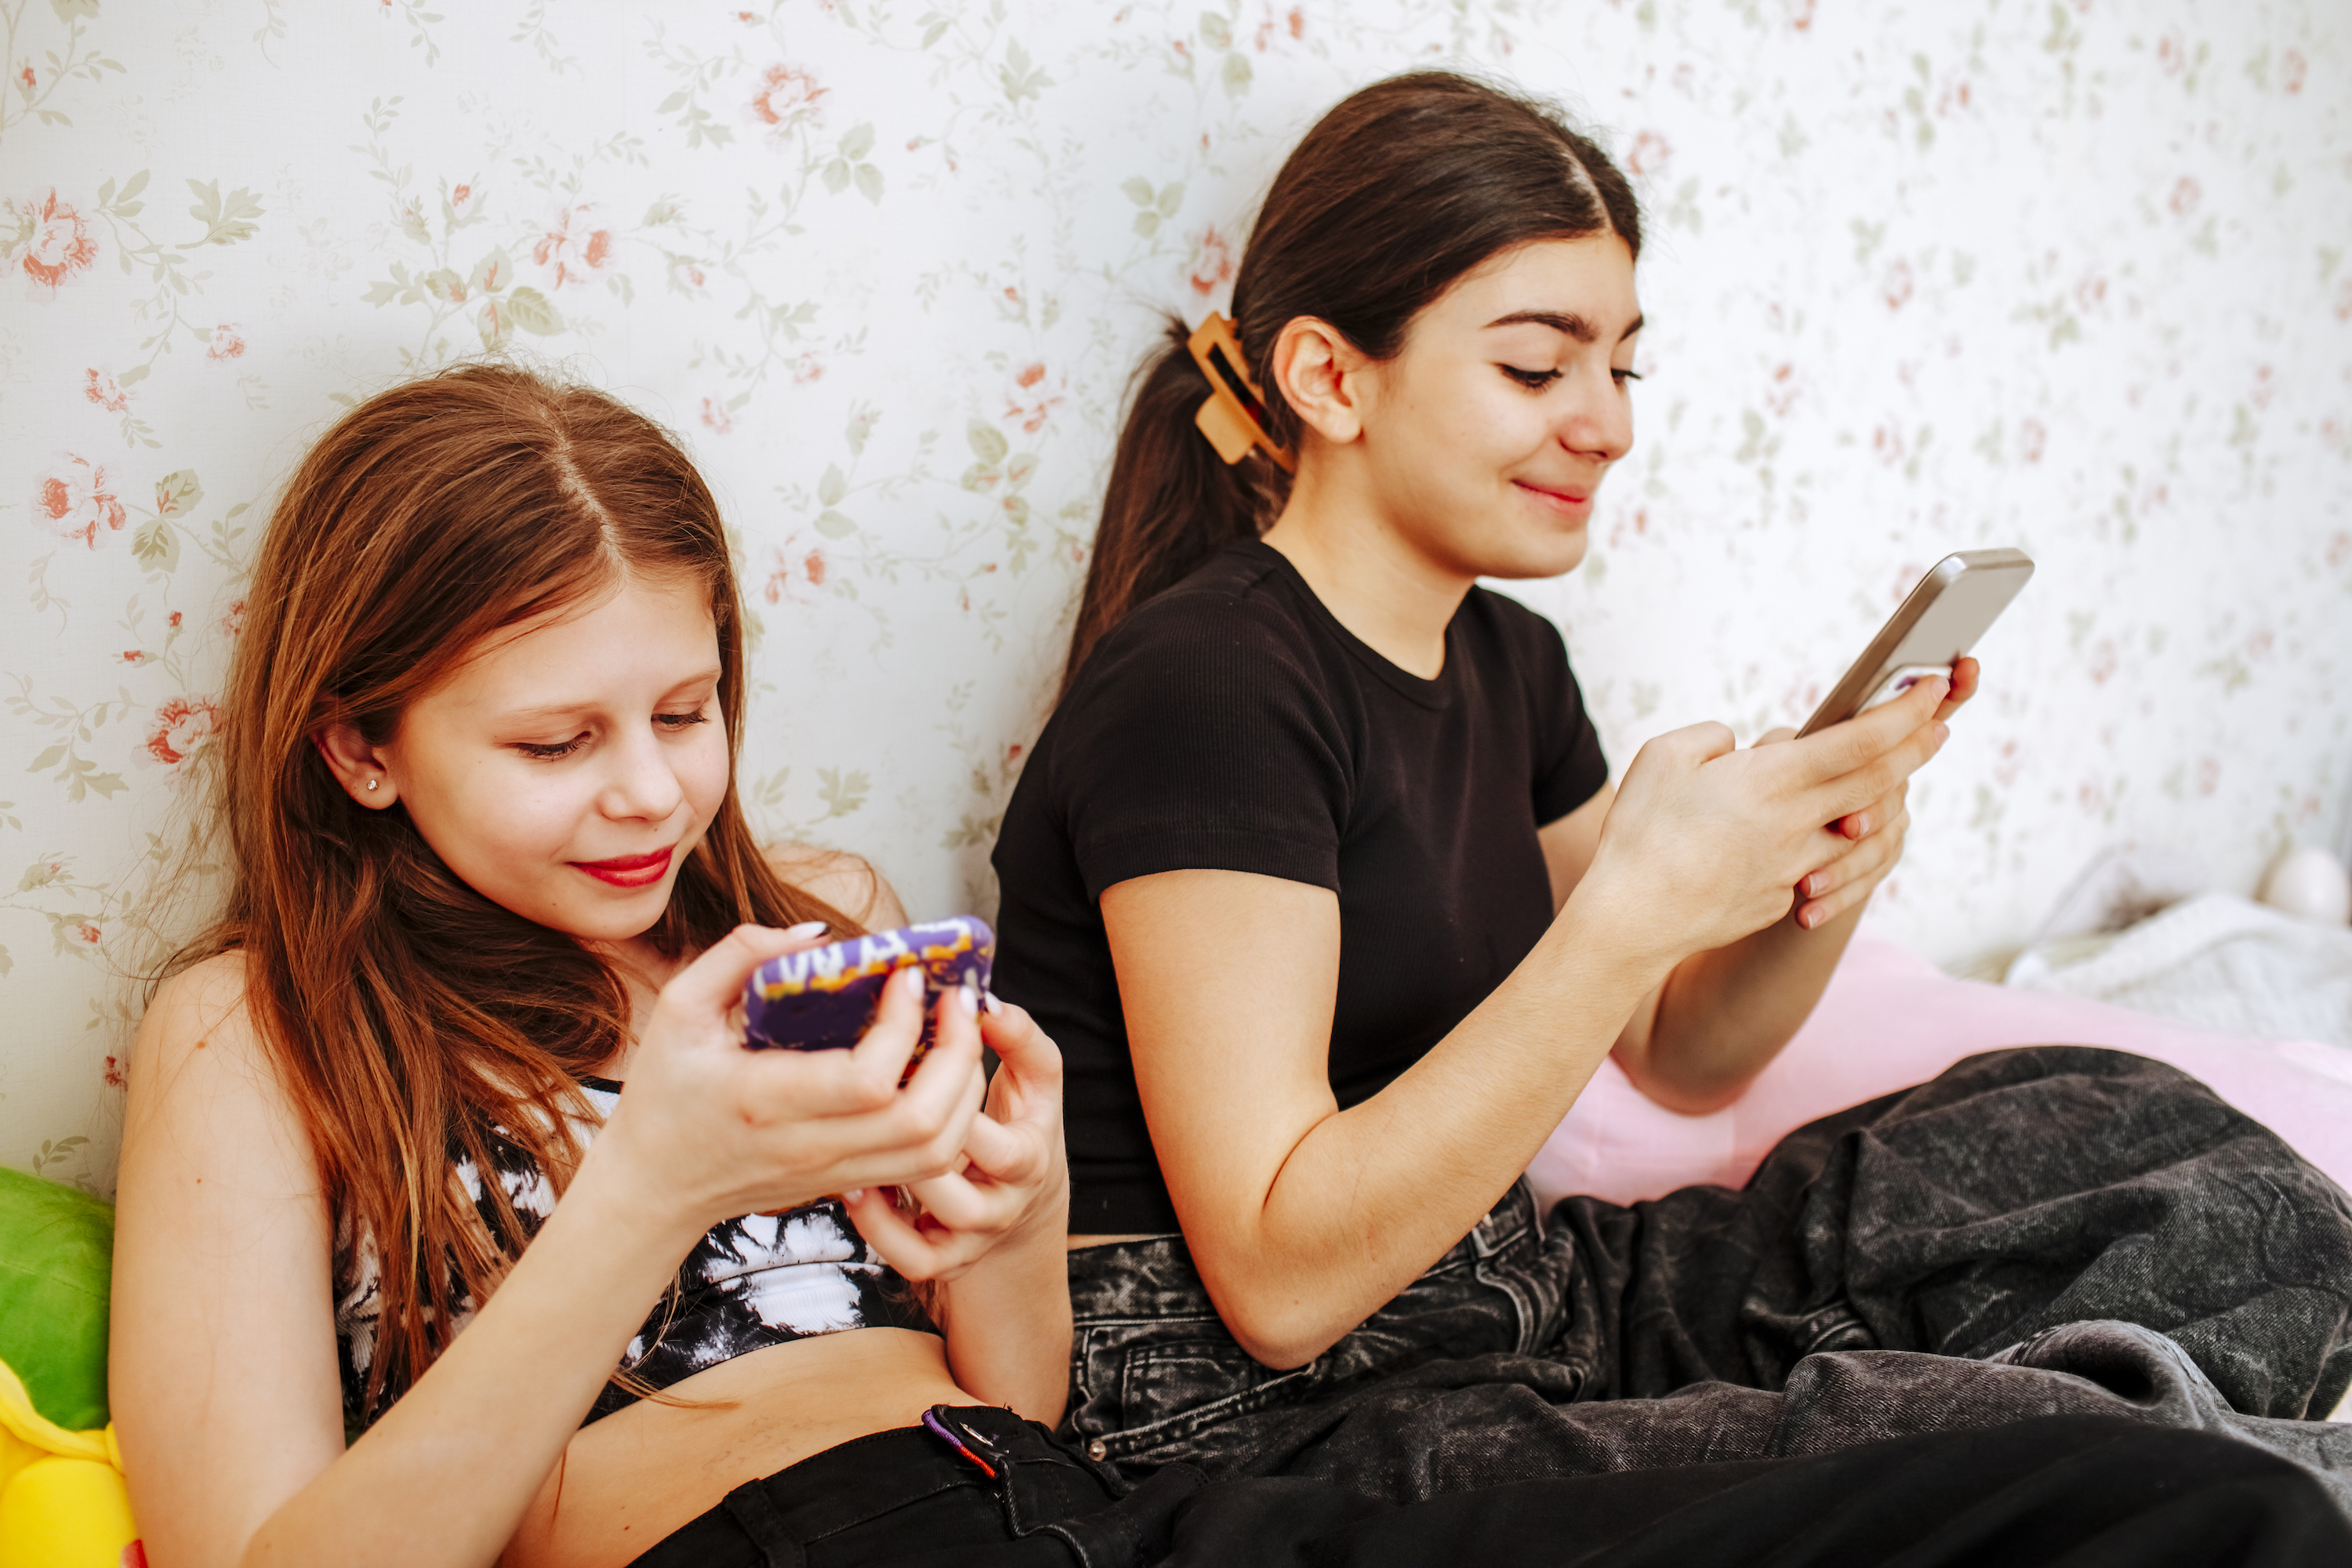 Educators, Policymakers Promote ‘Bring Back Boredom’ to Combat Screen Time Addiction